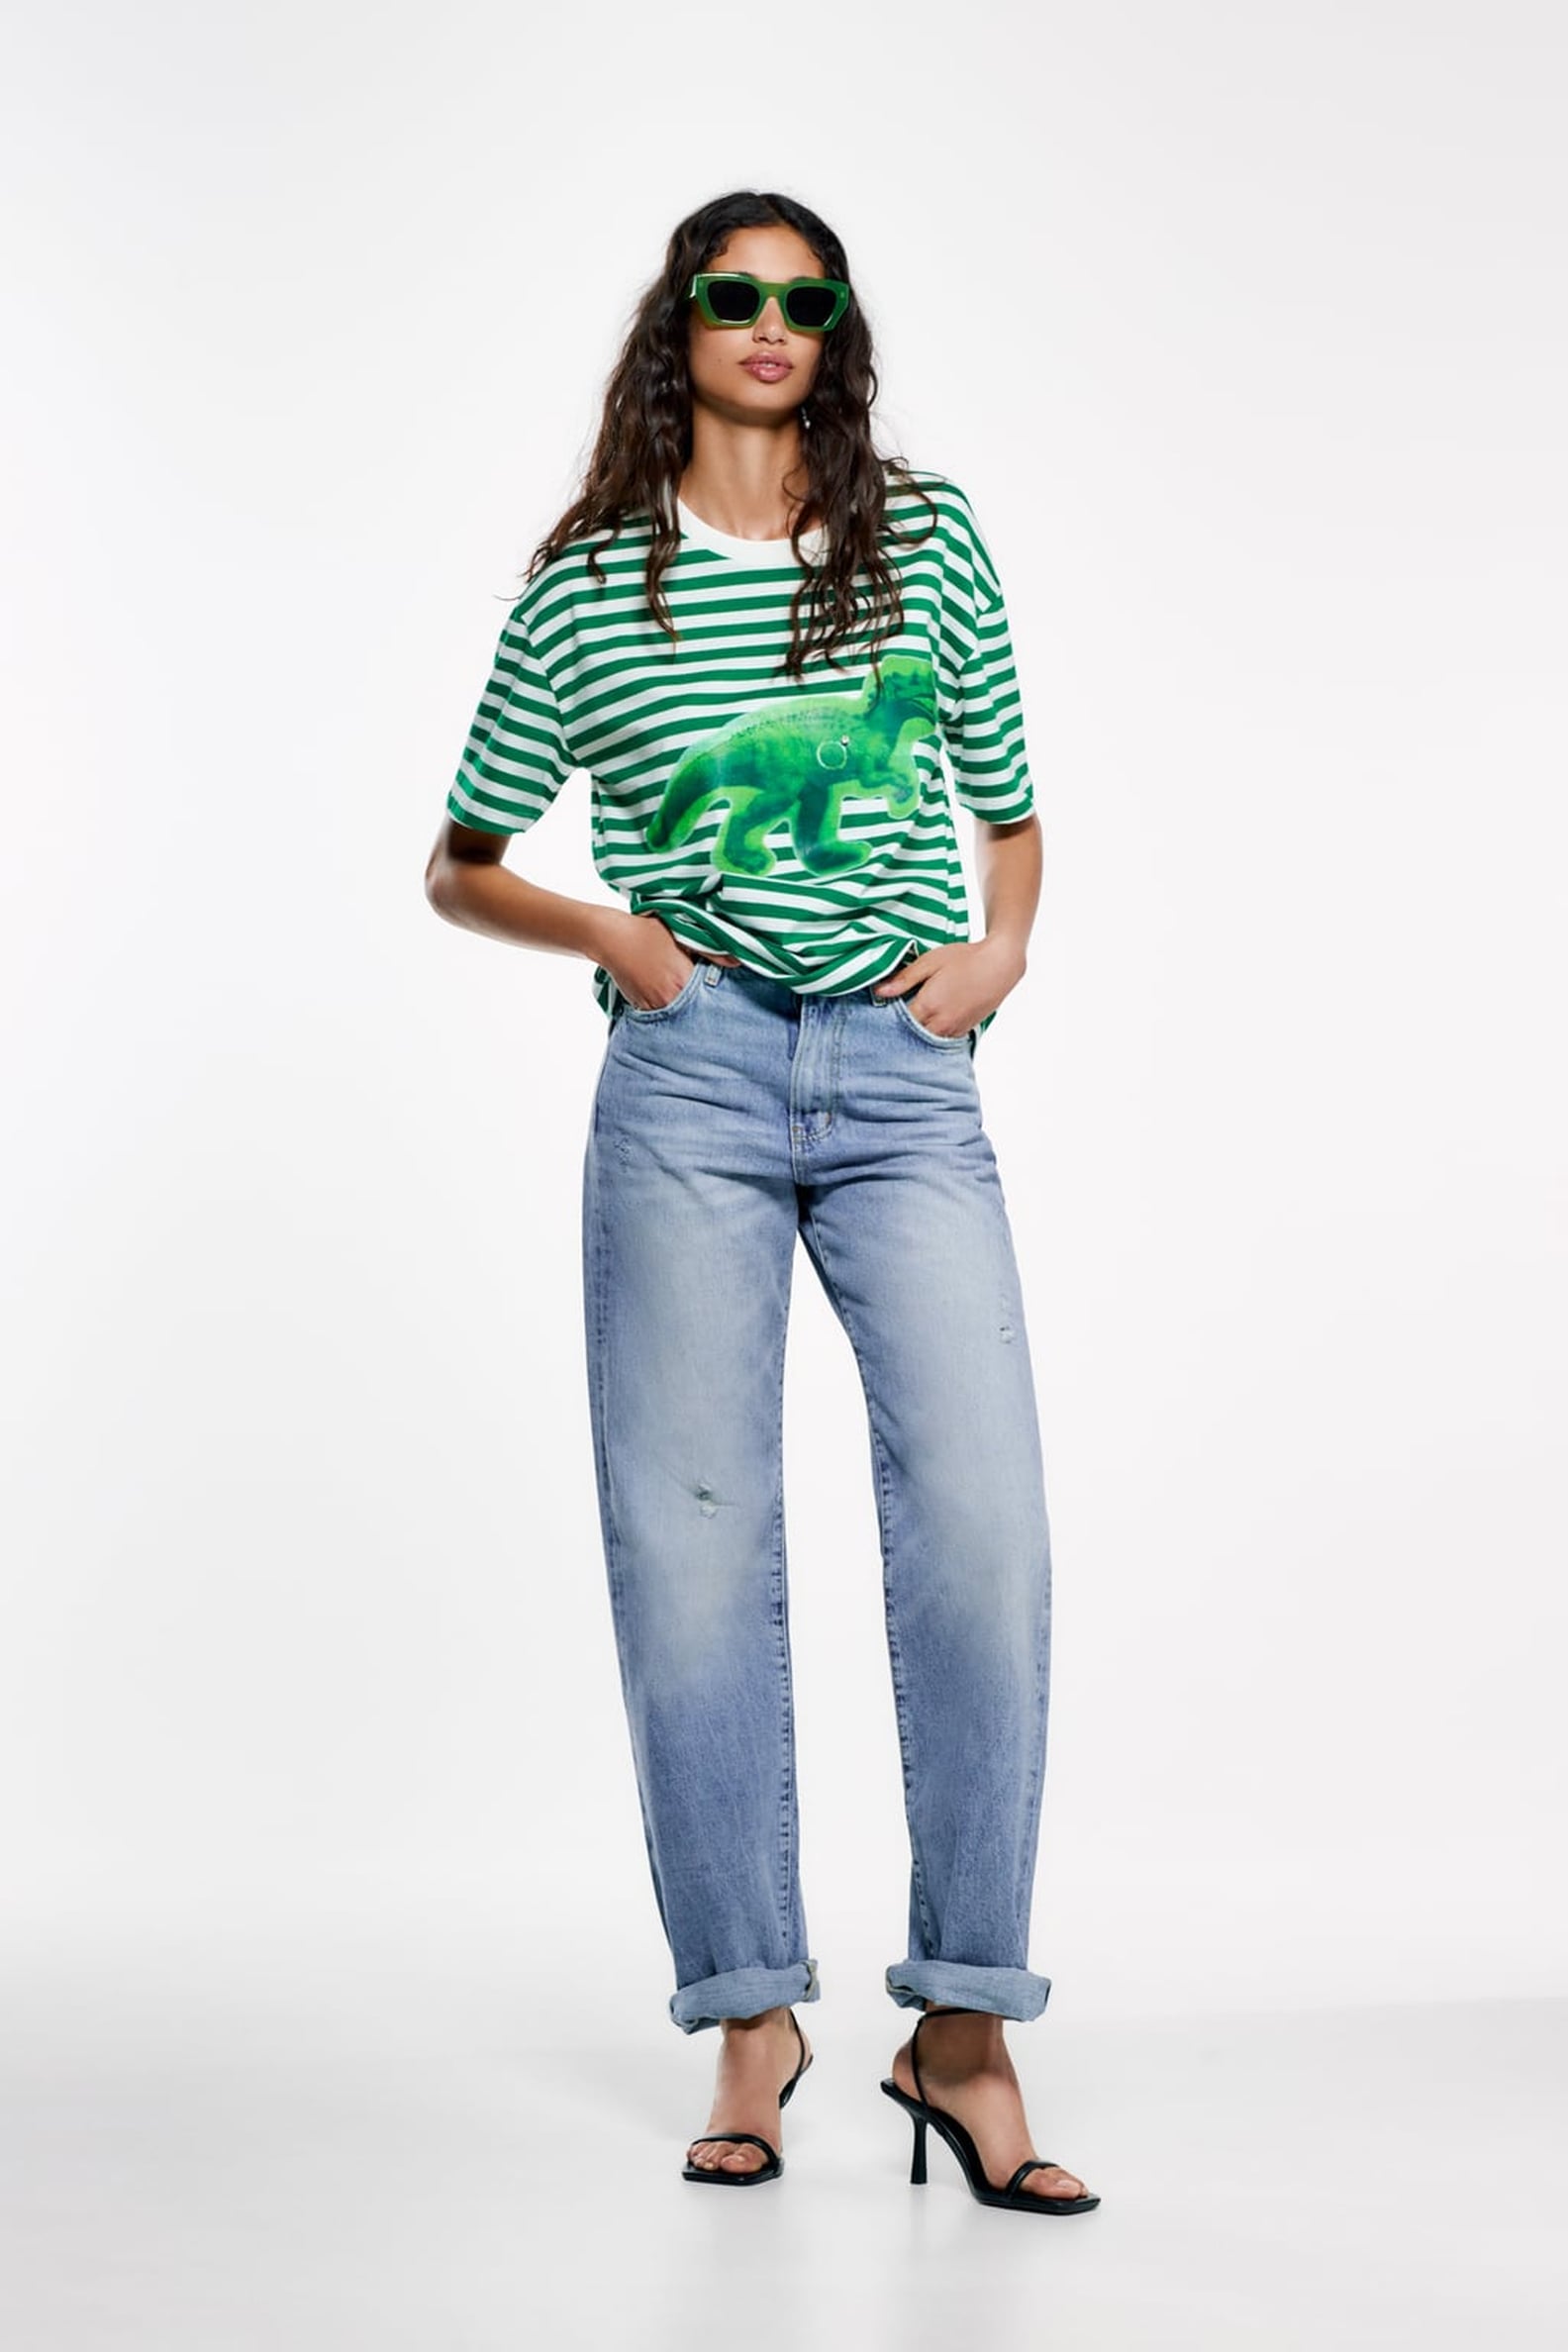 Shop Best Clothes and Shoes From Zara Spring Collection 2022 | POPSUGAR ...